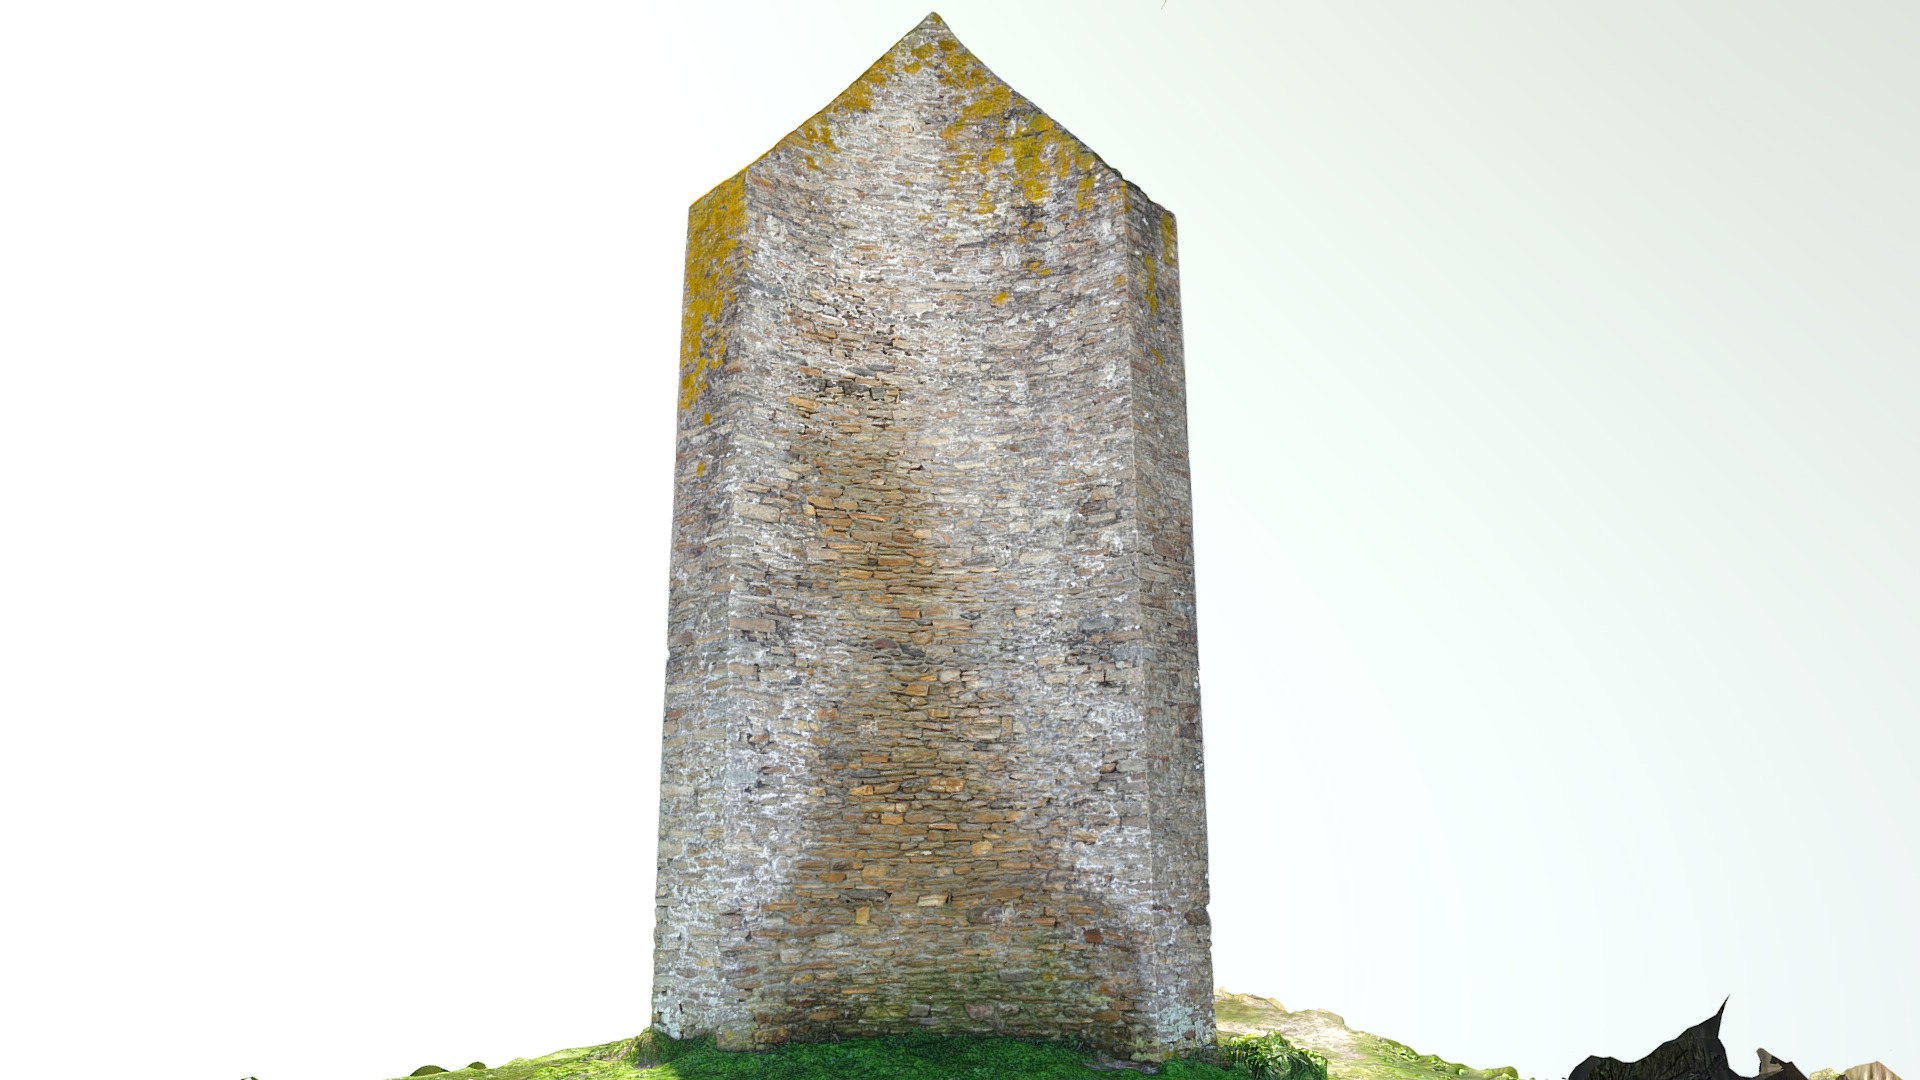 3D model Amer plage de Raguenez – 3DF Zephyr - This is a 3D model of the Amer plage de Raguenez - 3DF Zephyr. The 3D model is about a stone tower on a hill.